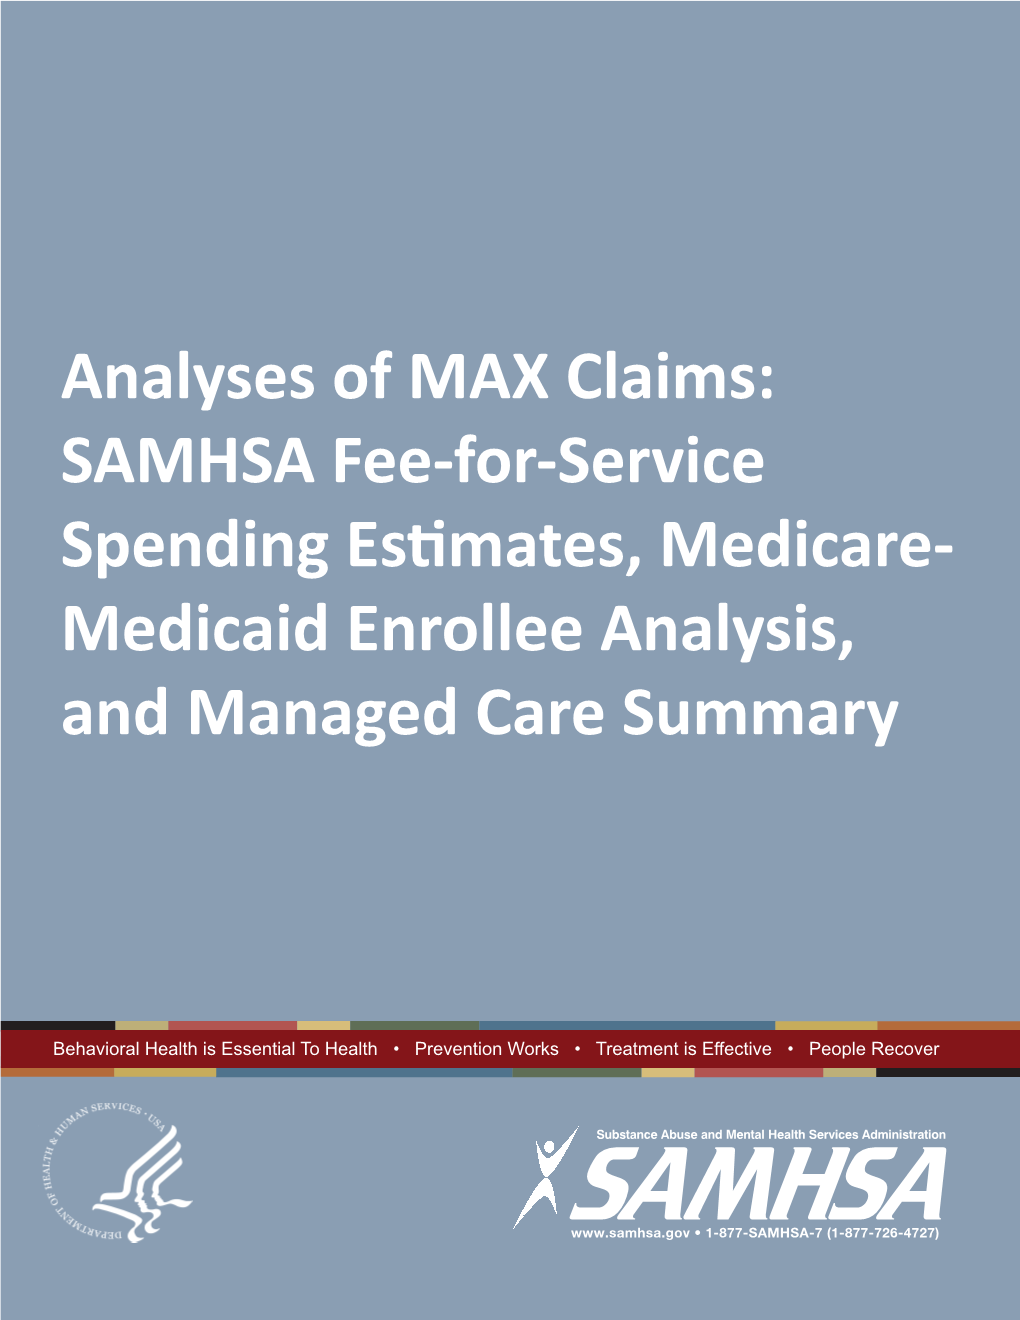 SAMHSA Fee-For-Service Spending Estimates, Medicare- Medicaid Enrollee Analysis, and Managed Care Summary